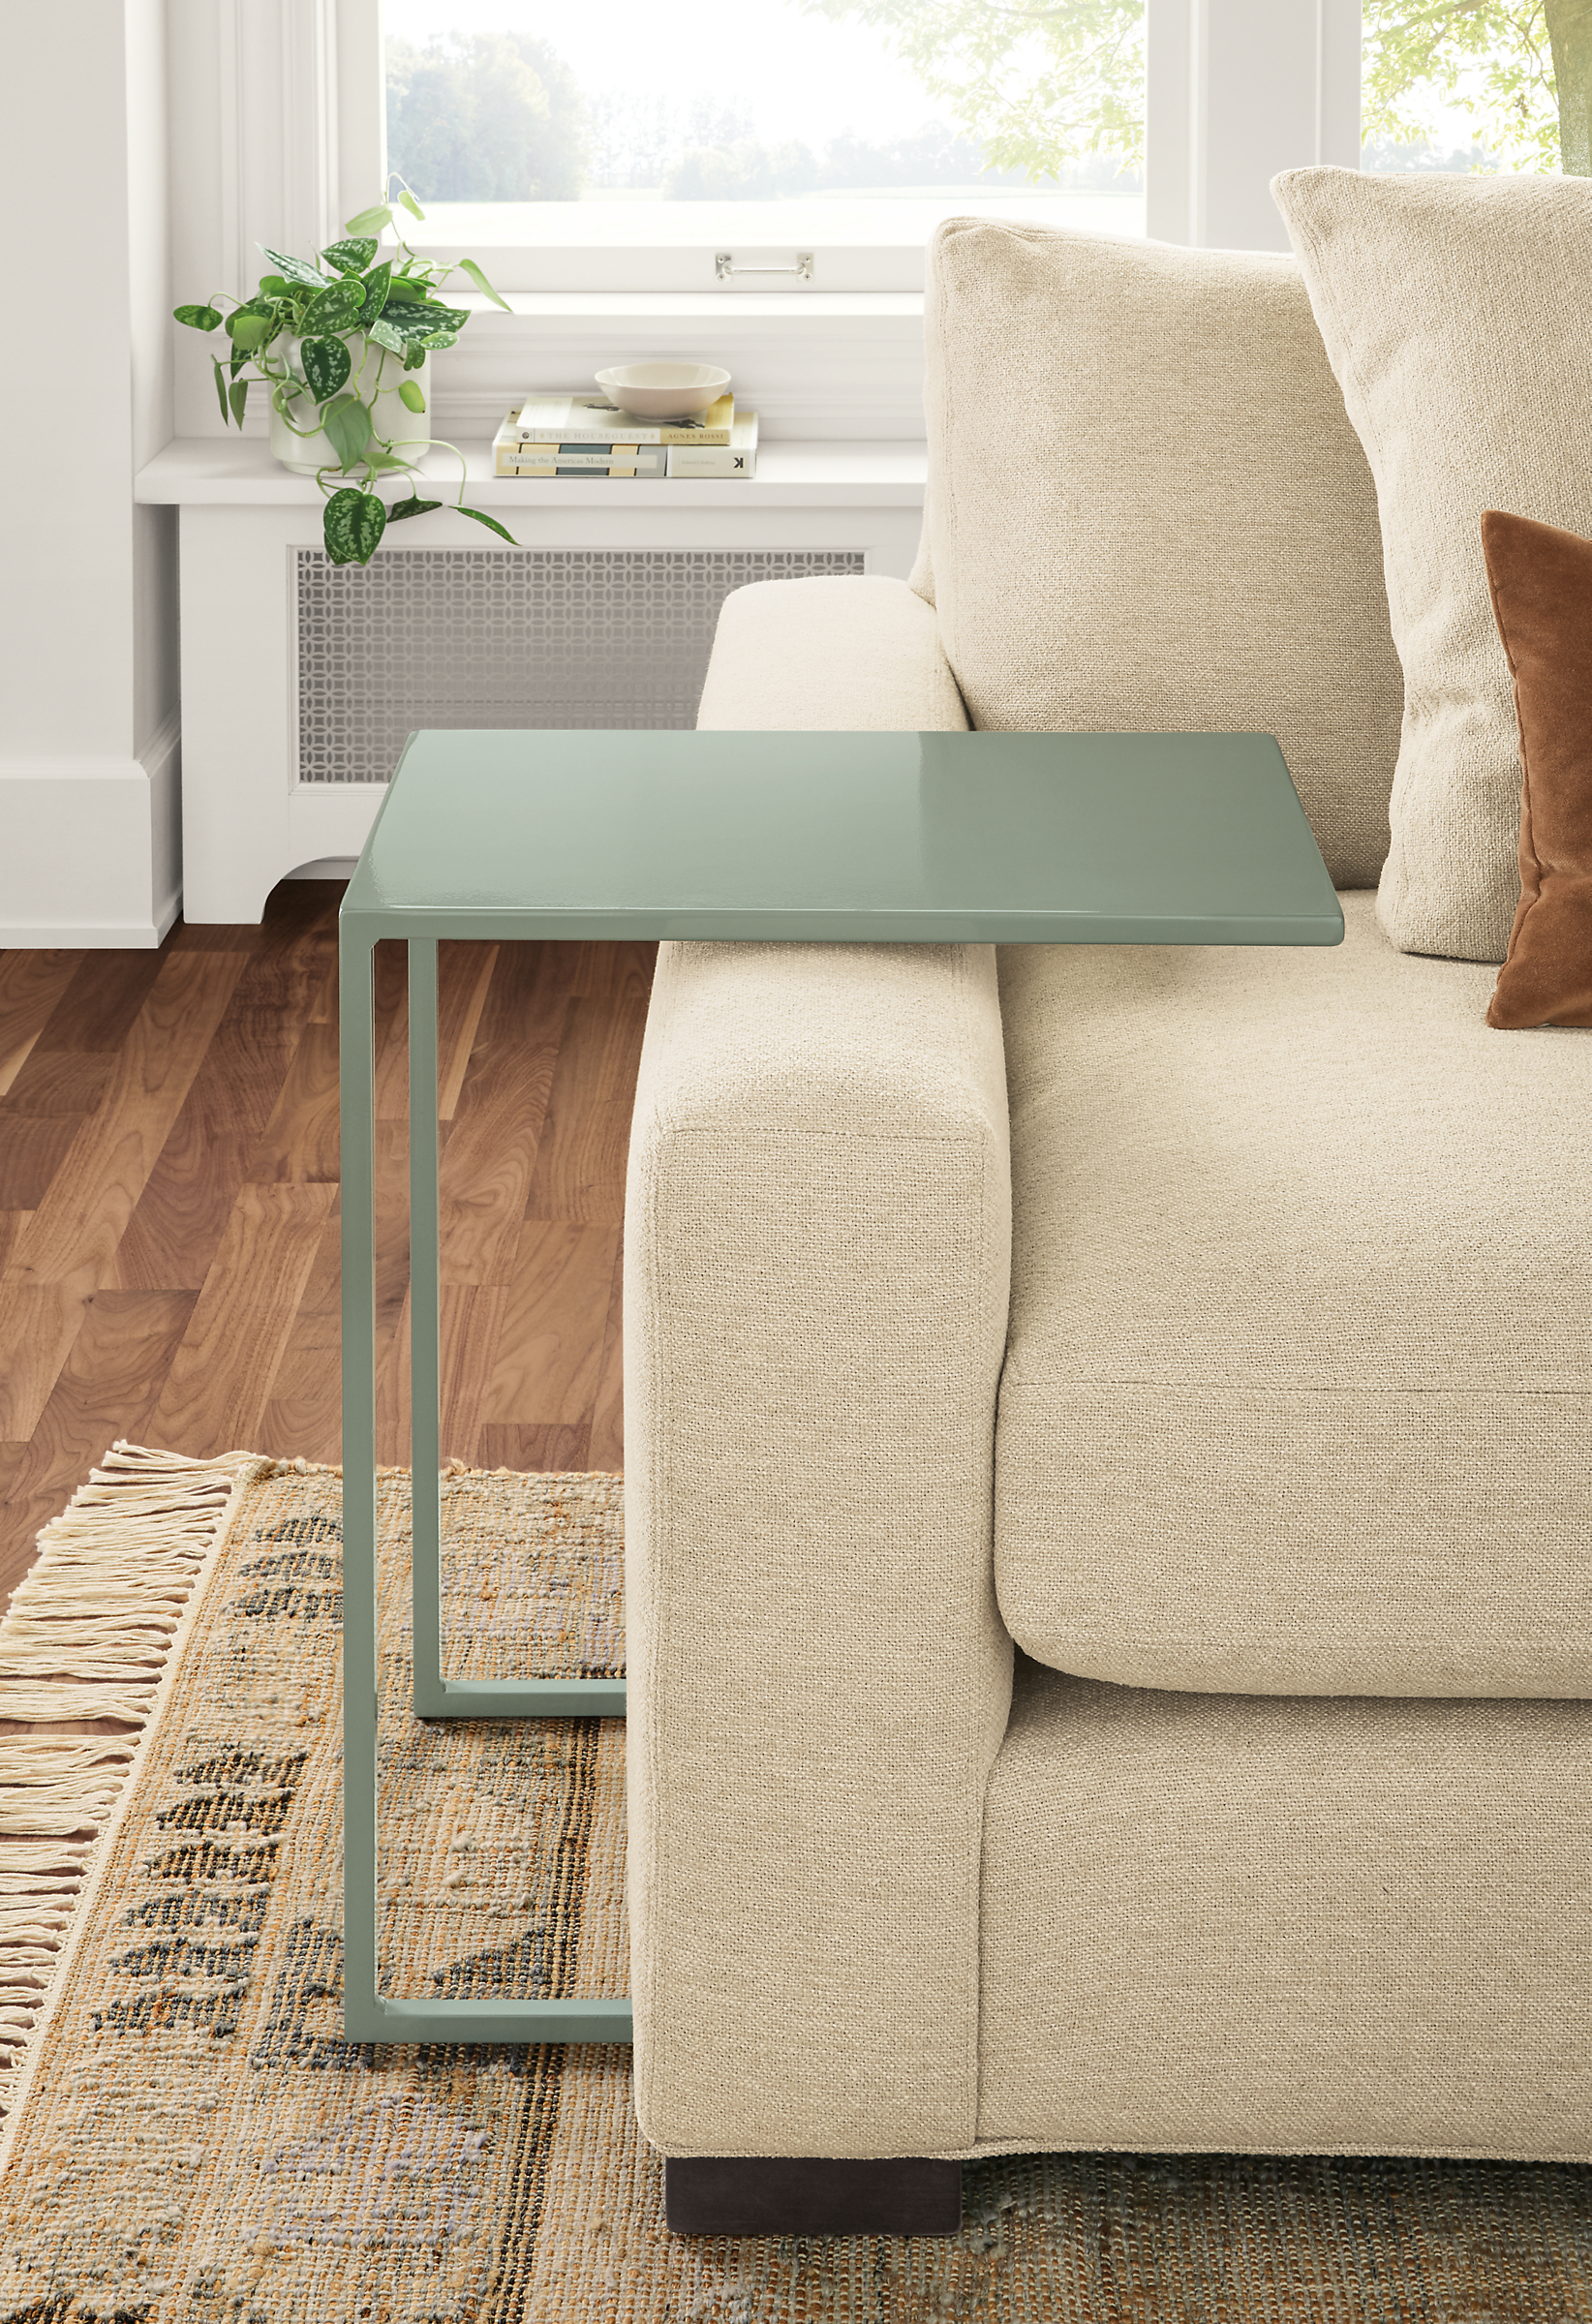 Detail of Slim C-table in Sage beside taupe sofa.